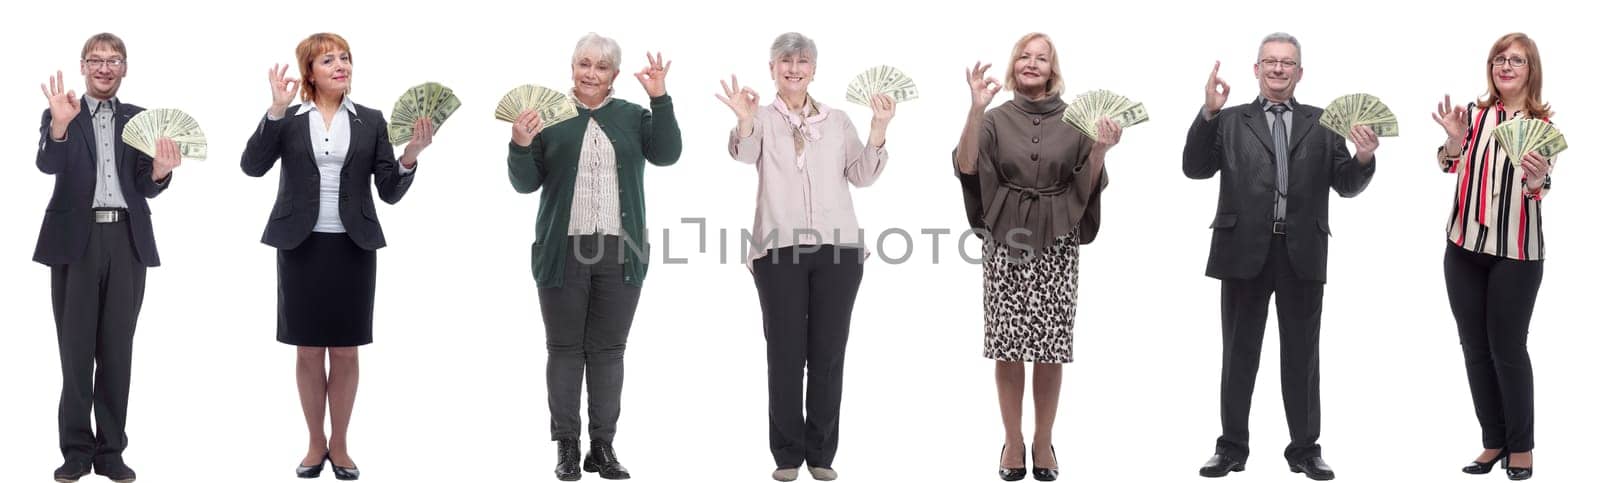 group of successful people holding money in hand isolated on white background